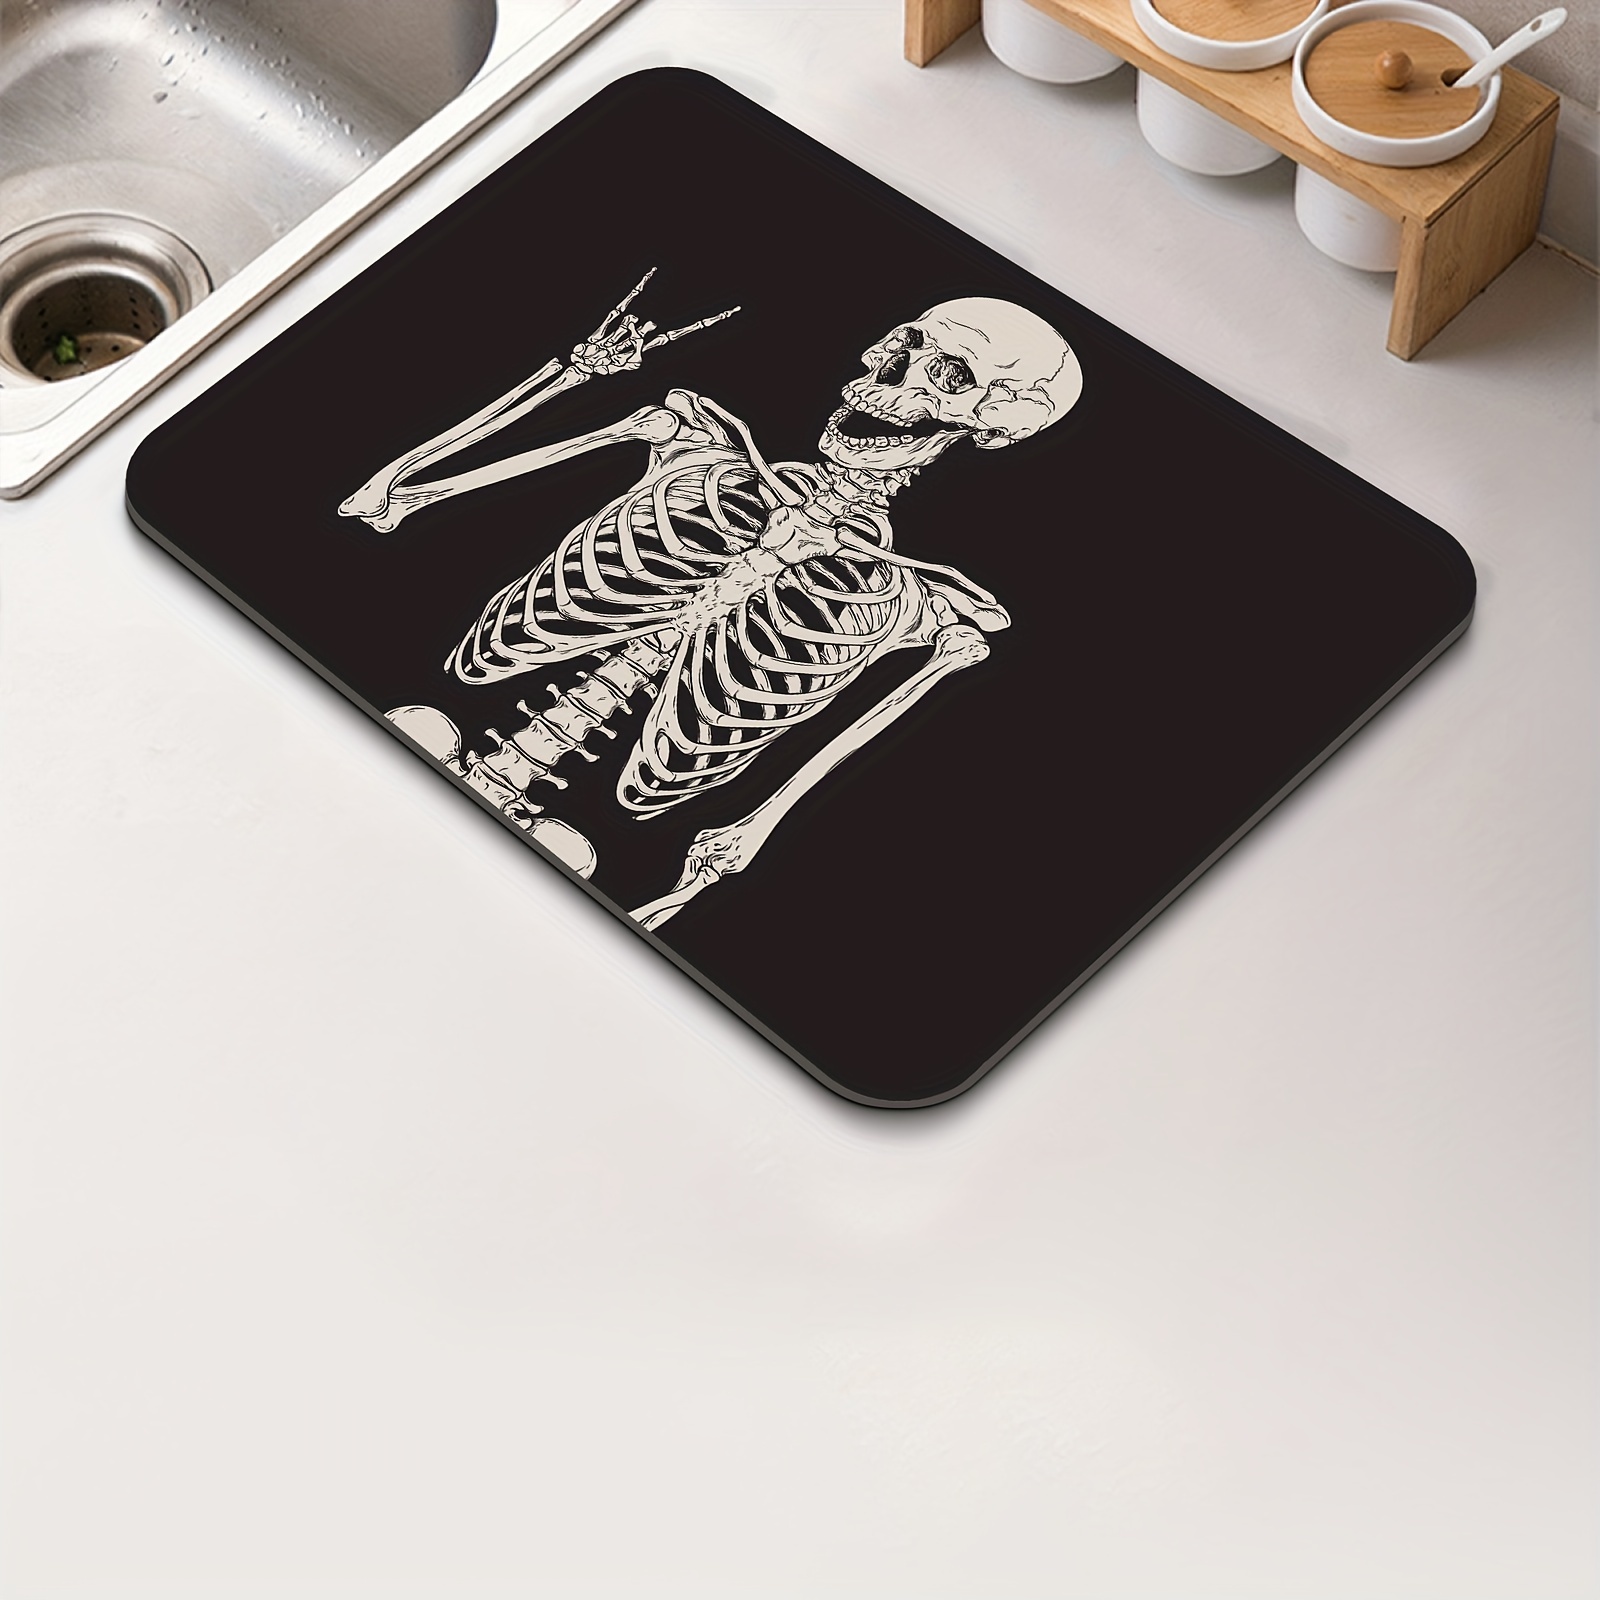 Halloween Dish Drying Mats for Kitchen Counter, 18X24 Inch Dish